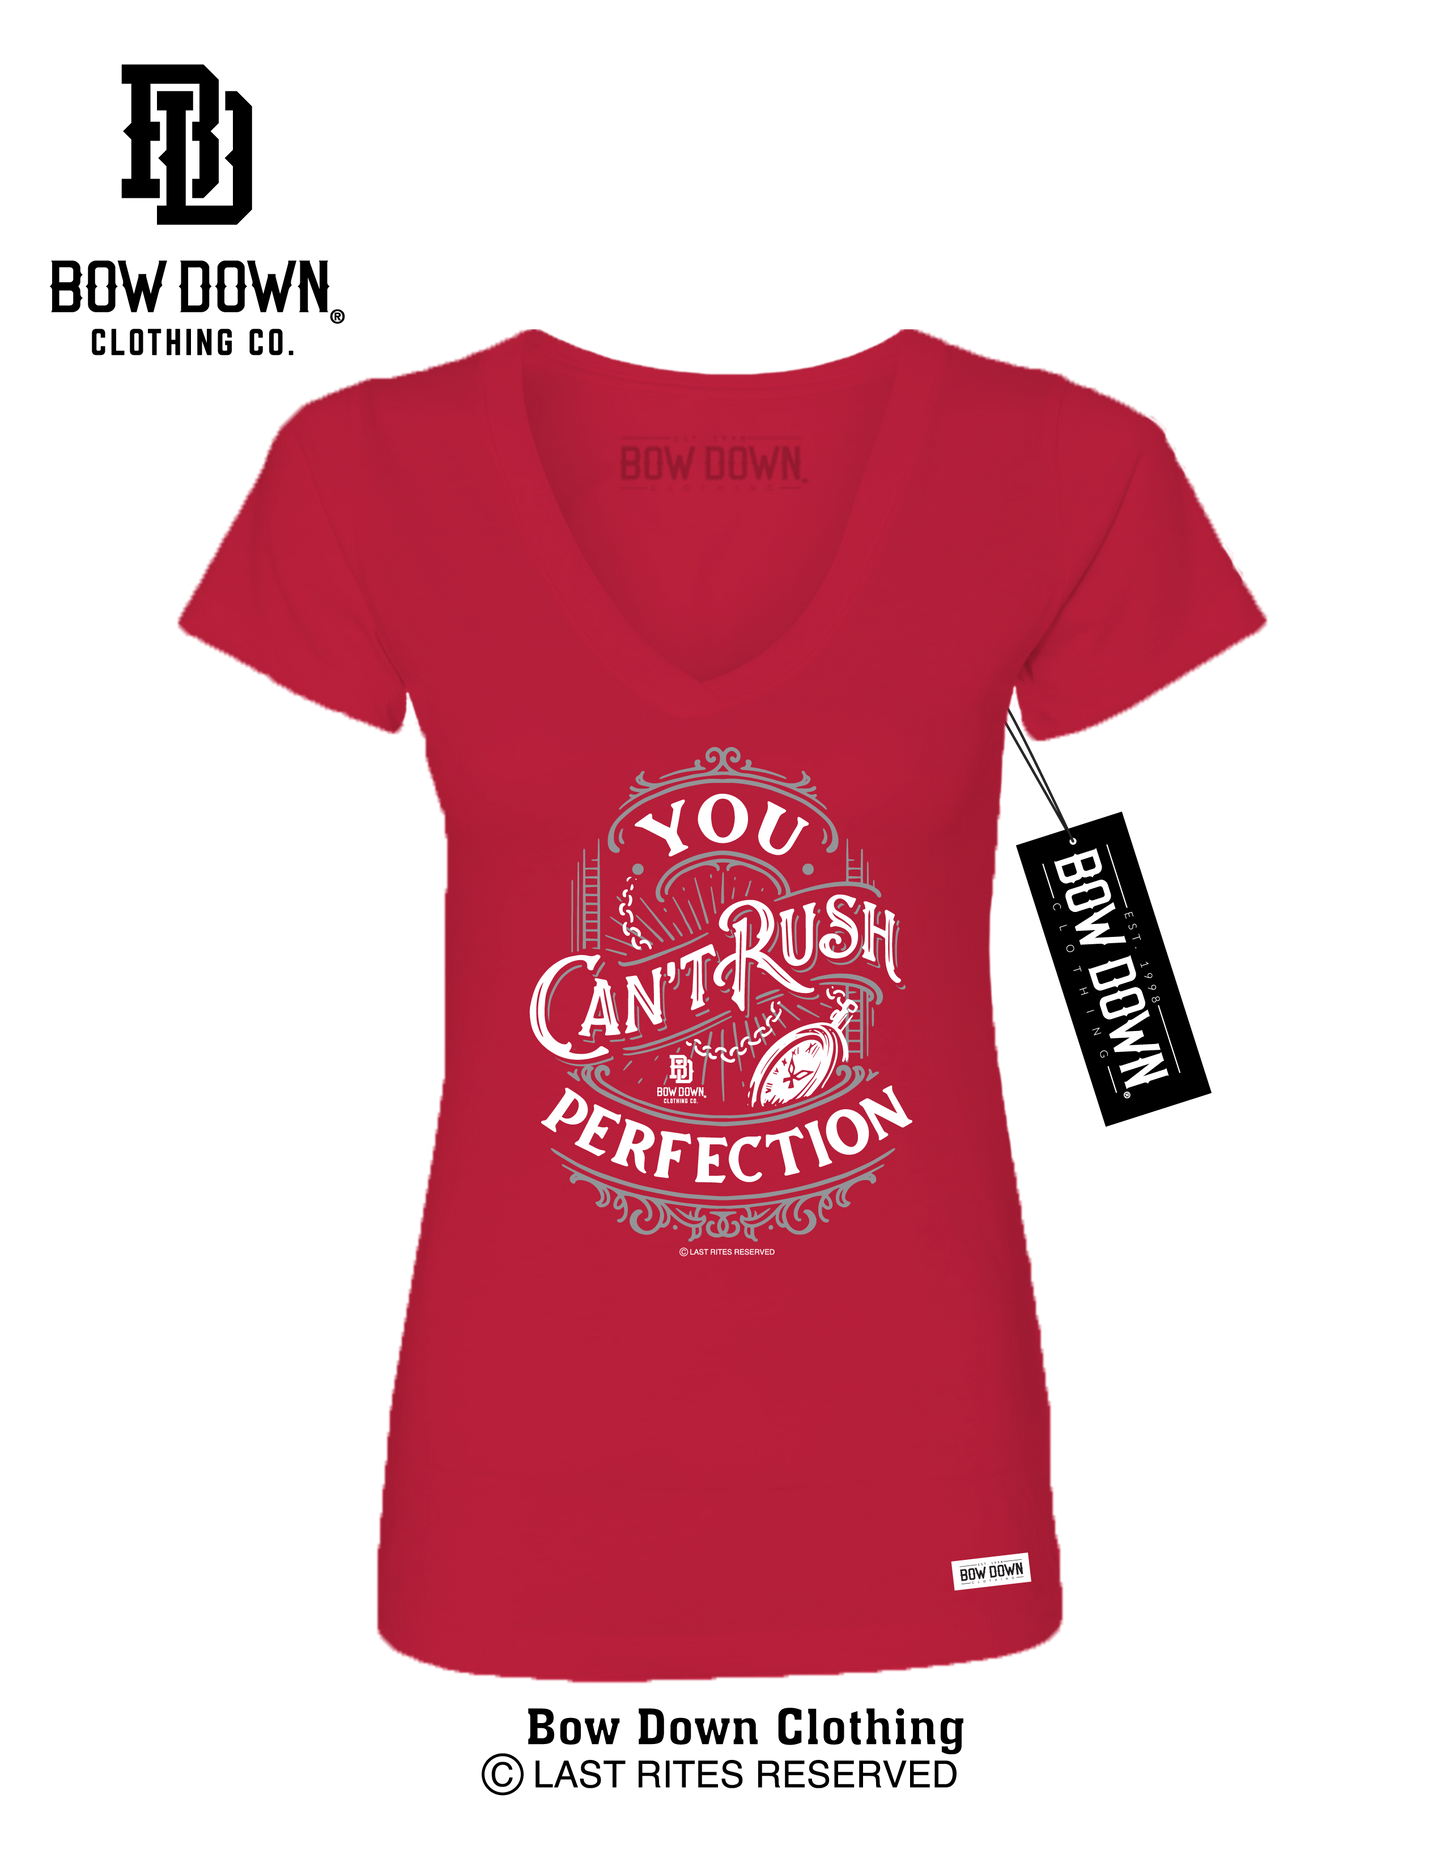 CAN'T RUSH PERFECTION WOMEN'S V-NECK